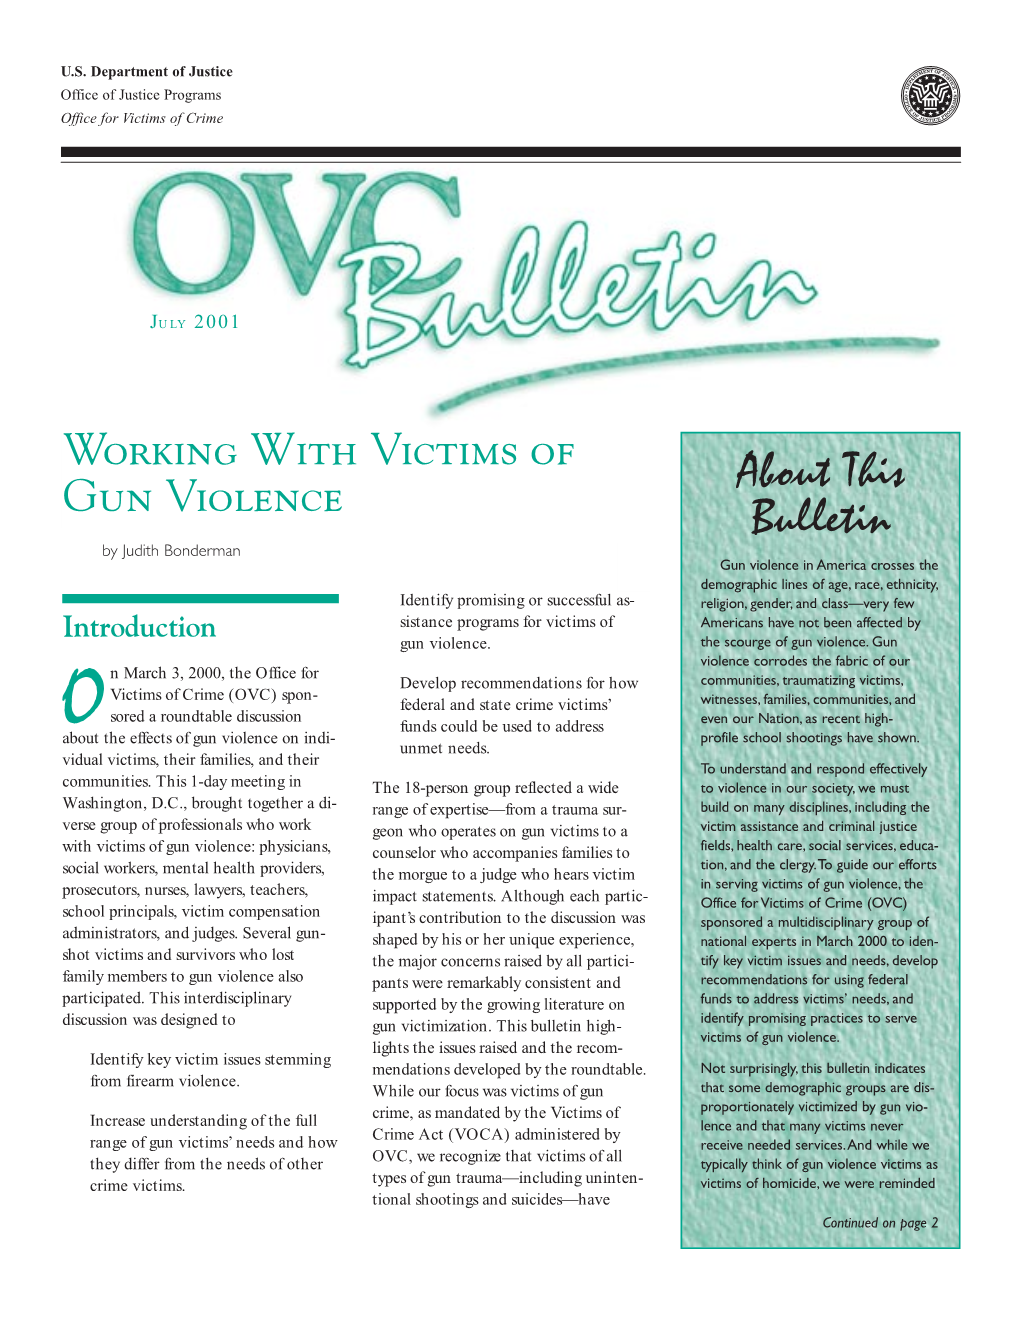 OVC Bulletin, July 2001: Working with Victims of Gun Violence